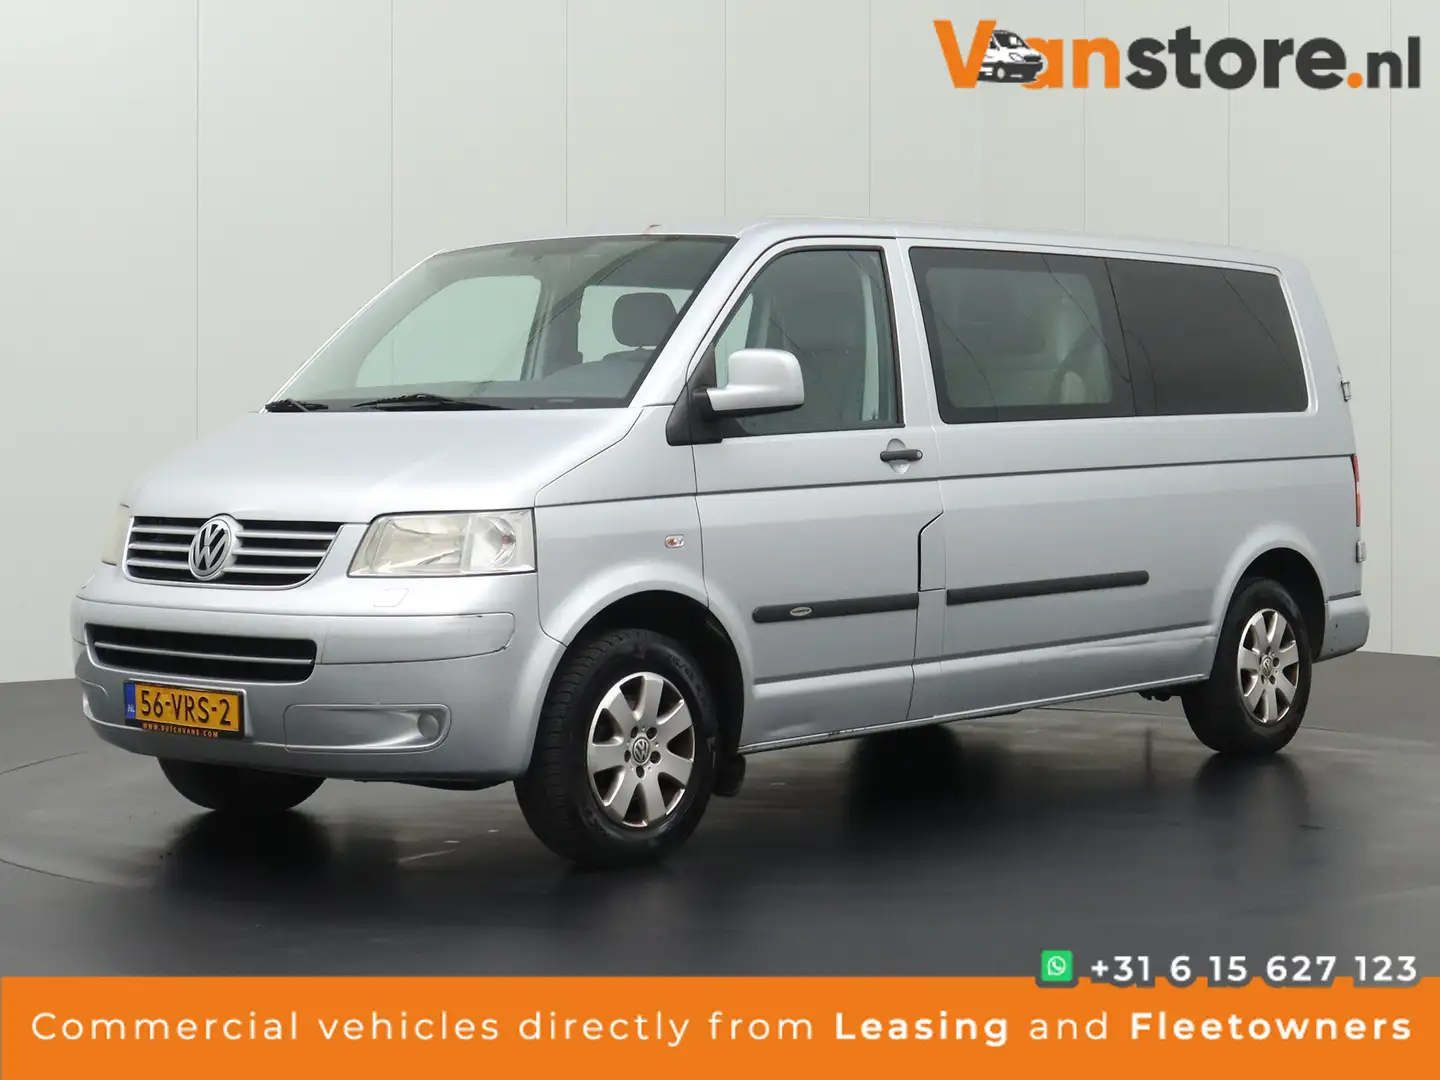 Volkswagen T5 Transporter 2.5TDI 130PK Dubbele Cabine Lang | 5-Persoons | Ai Argent - 1